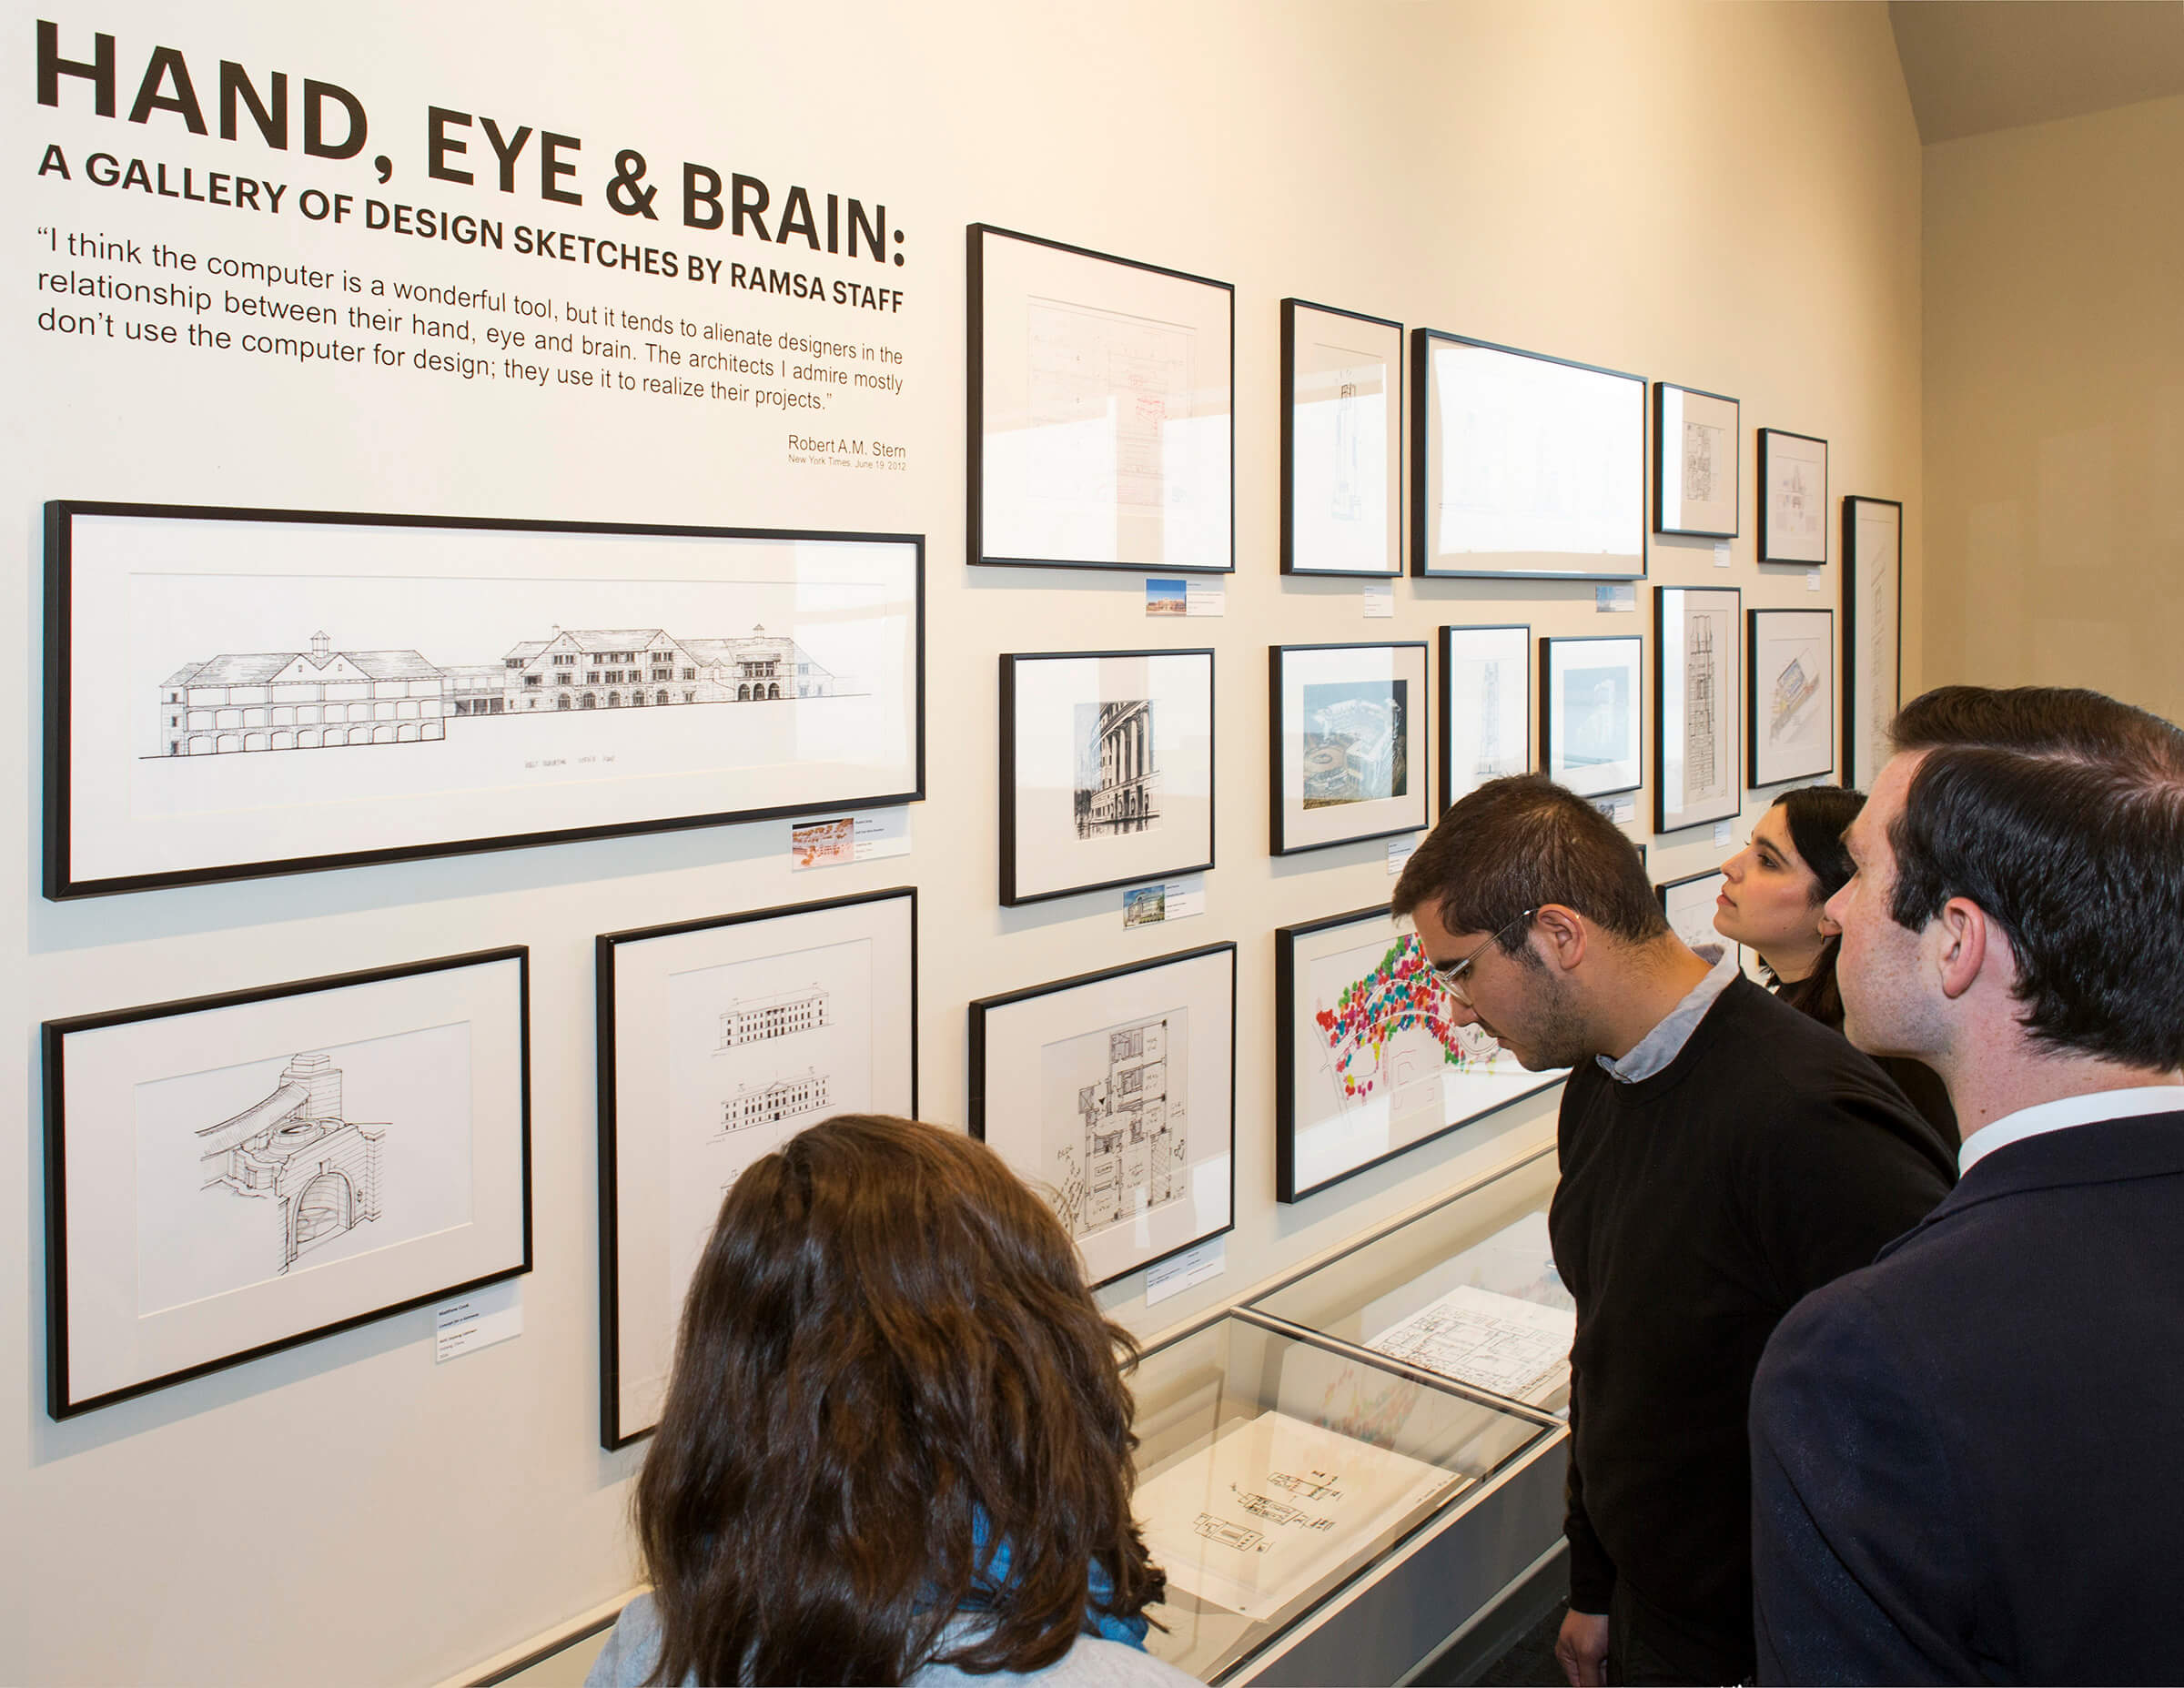 "Hand, Eye & Brain: A Gallery of Design Sketches by RAMSA Staff" Opens